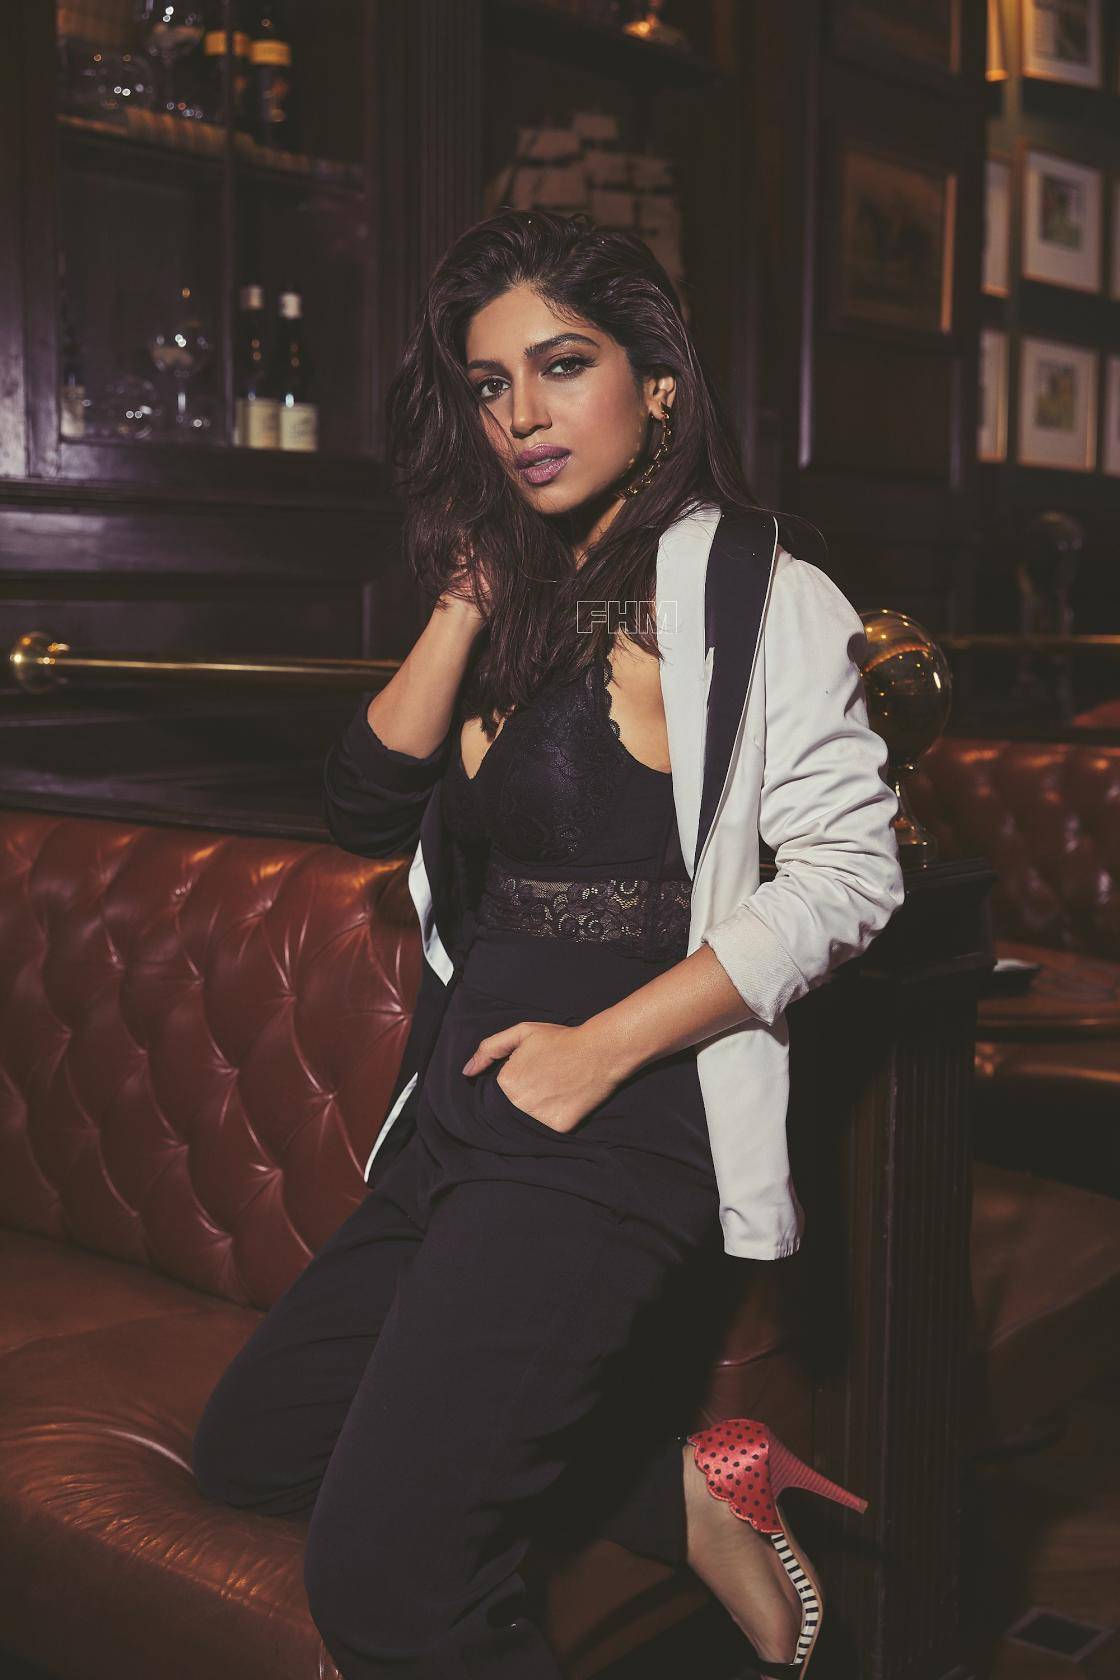 Actress Bhumi Pednekar graced herself with fieriness featured in Clovia  bralette for FHM Magazine Cover!, News, India